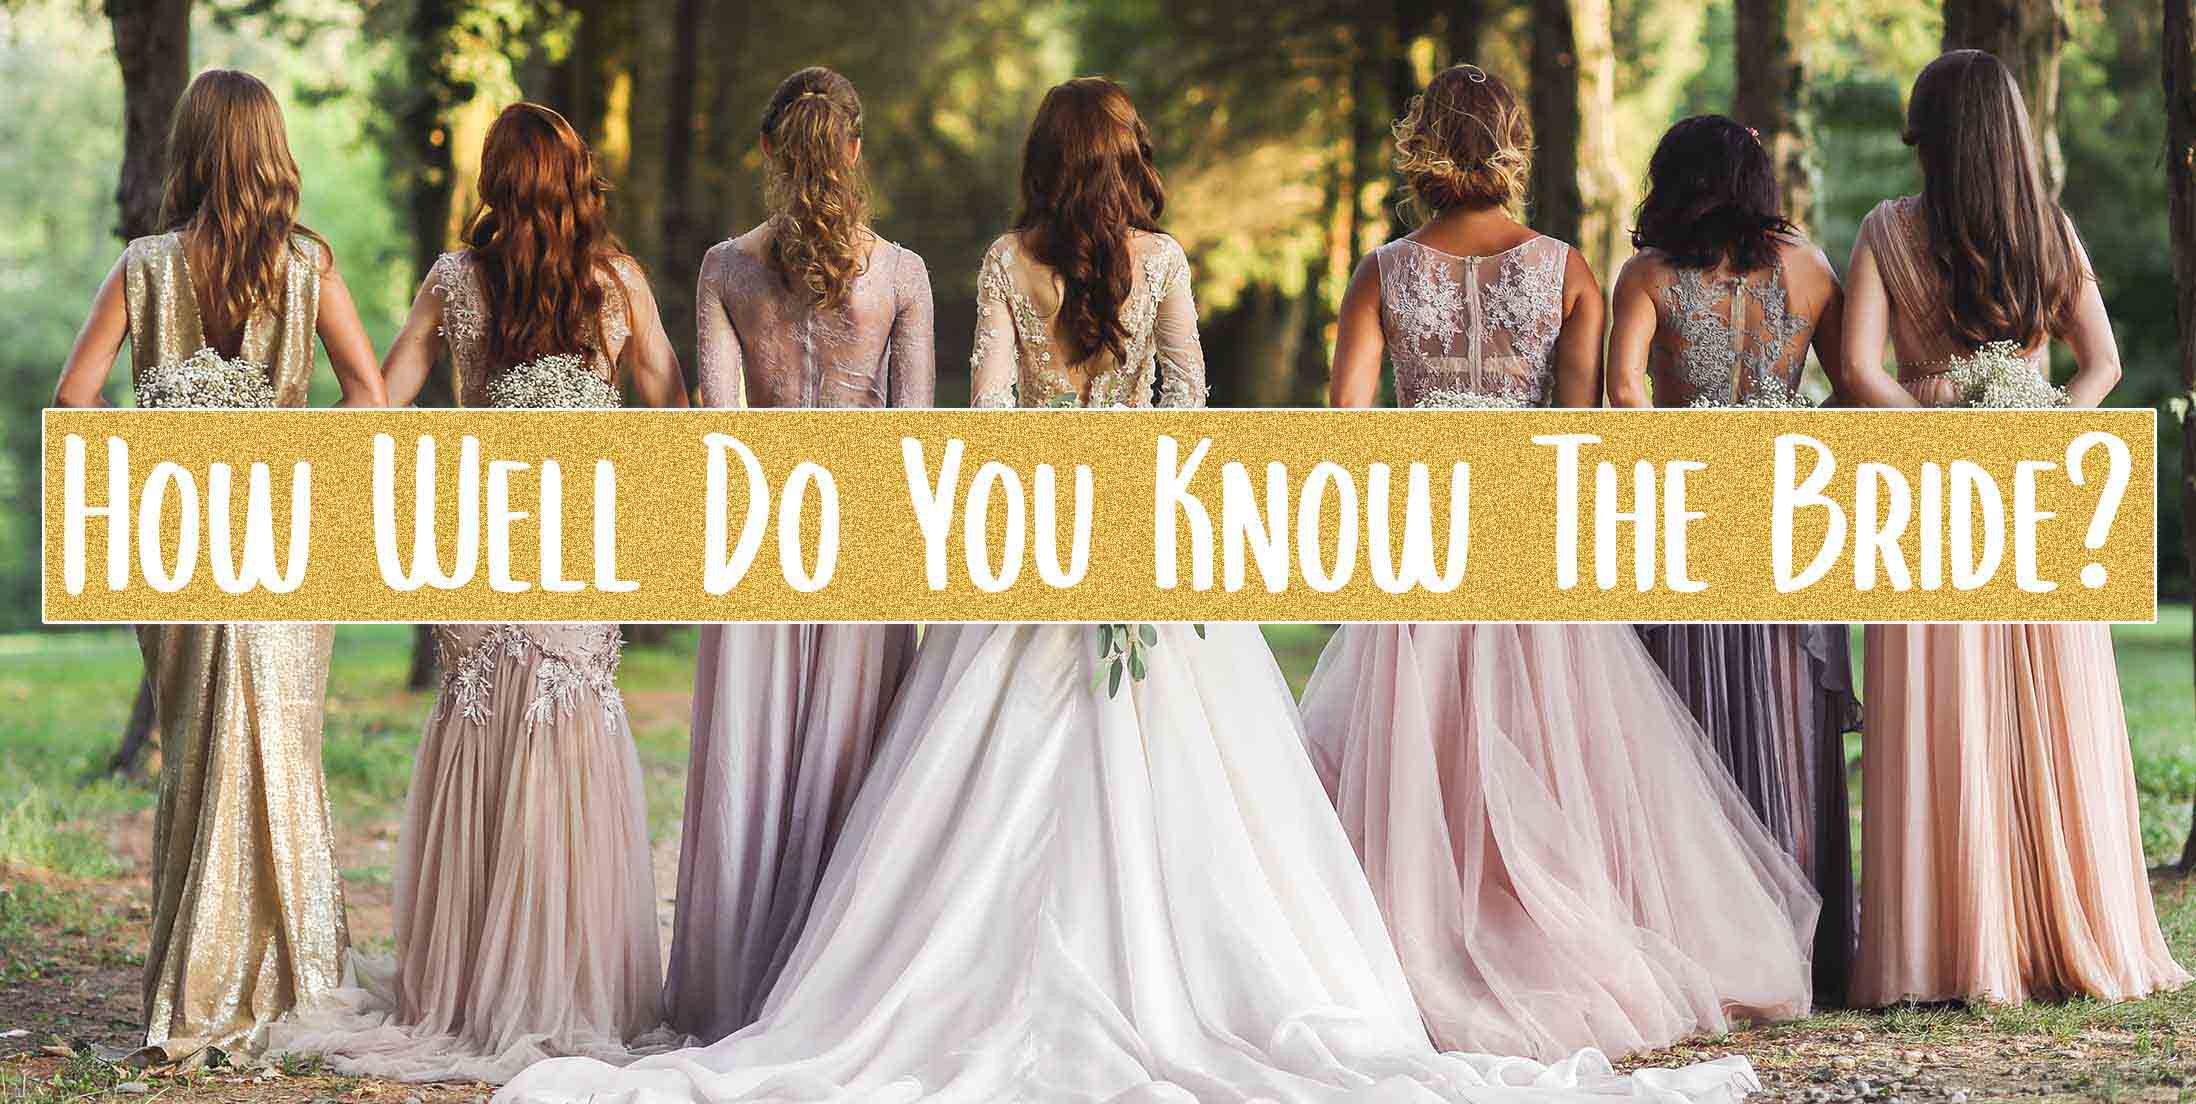 How Well Do You Know The Bride?